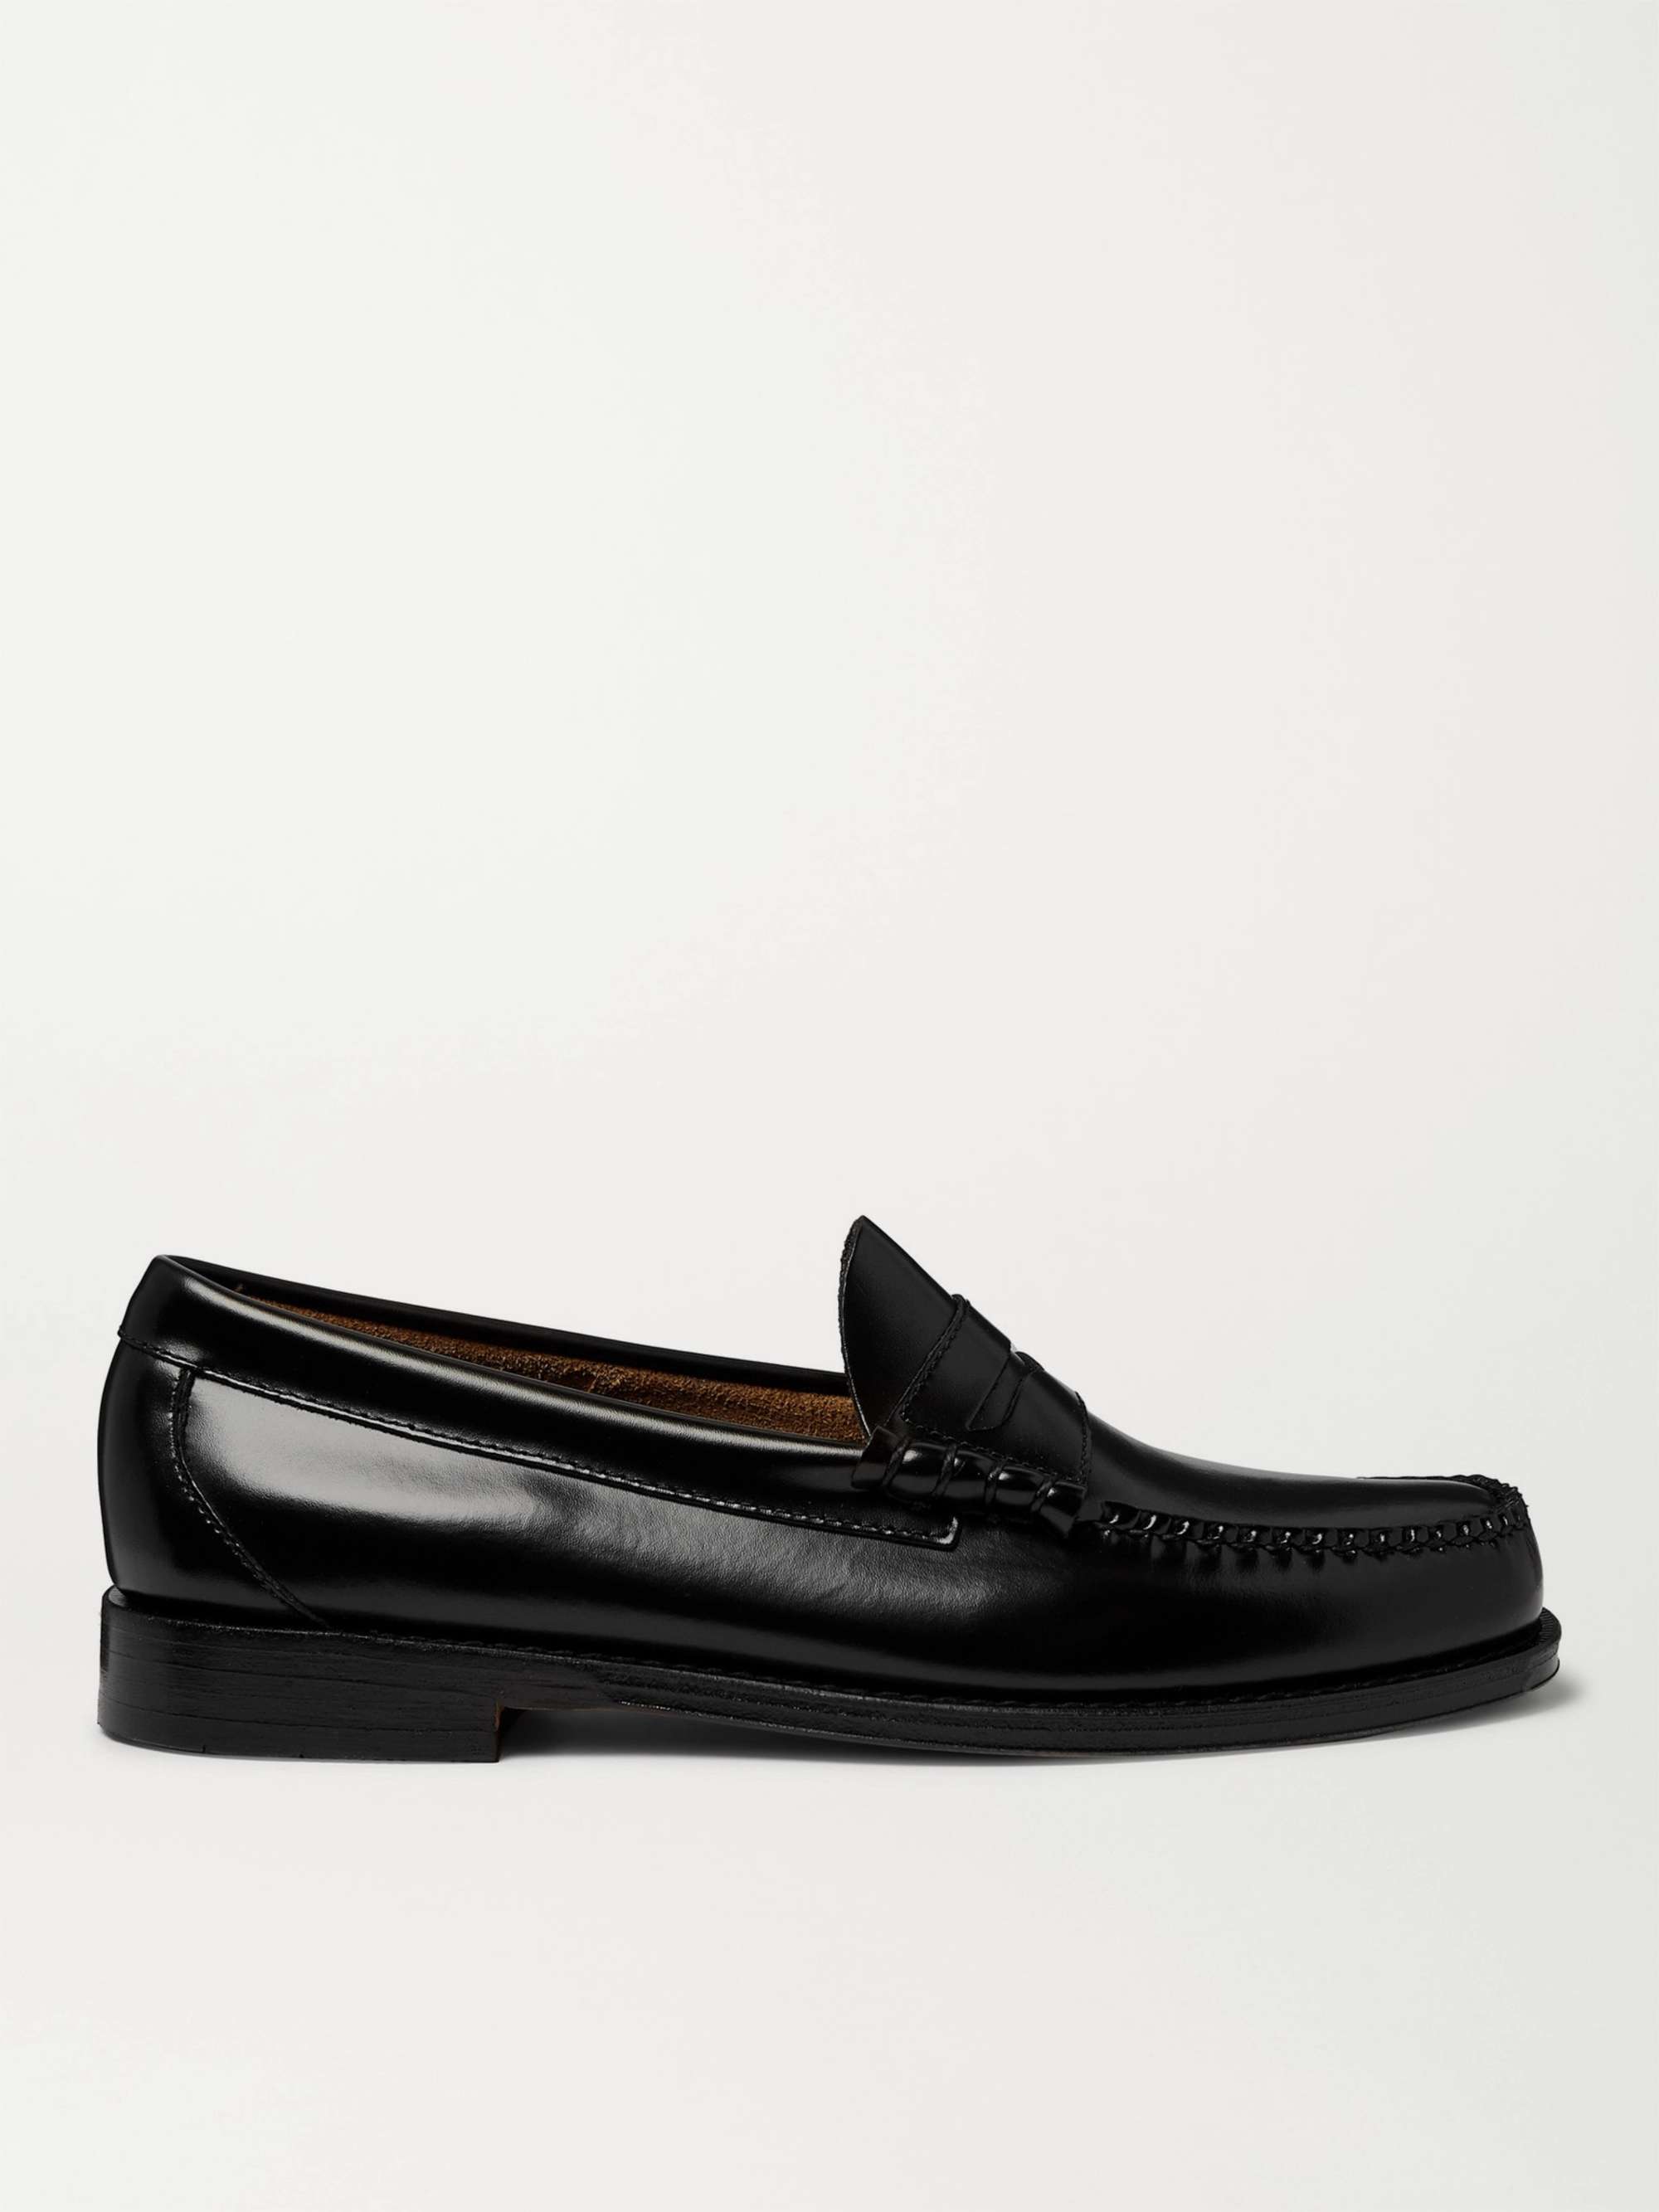 G.H. BASS & CO. Weejuns Heritage Larson Leather Penny Loafers for Men | MR  PORTER